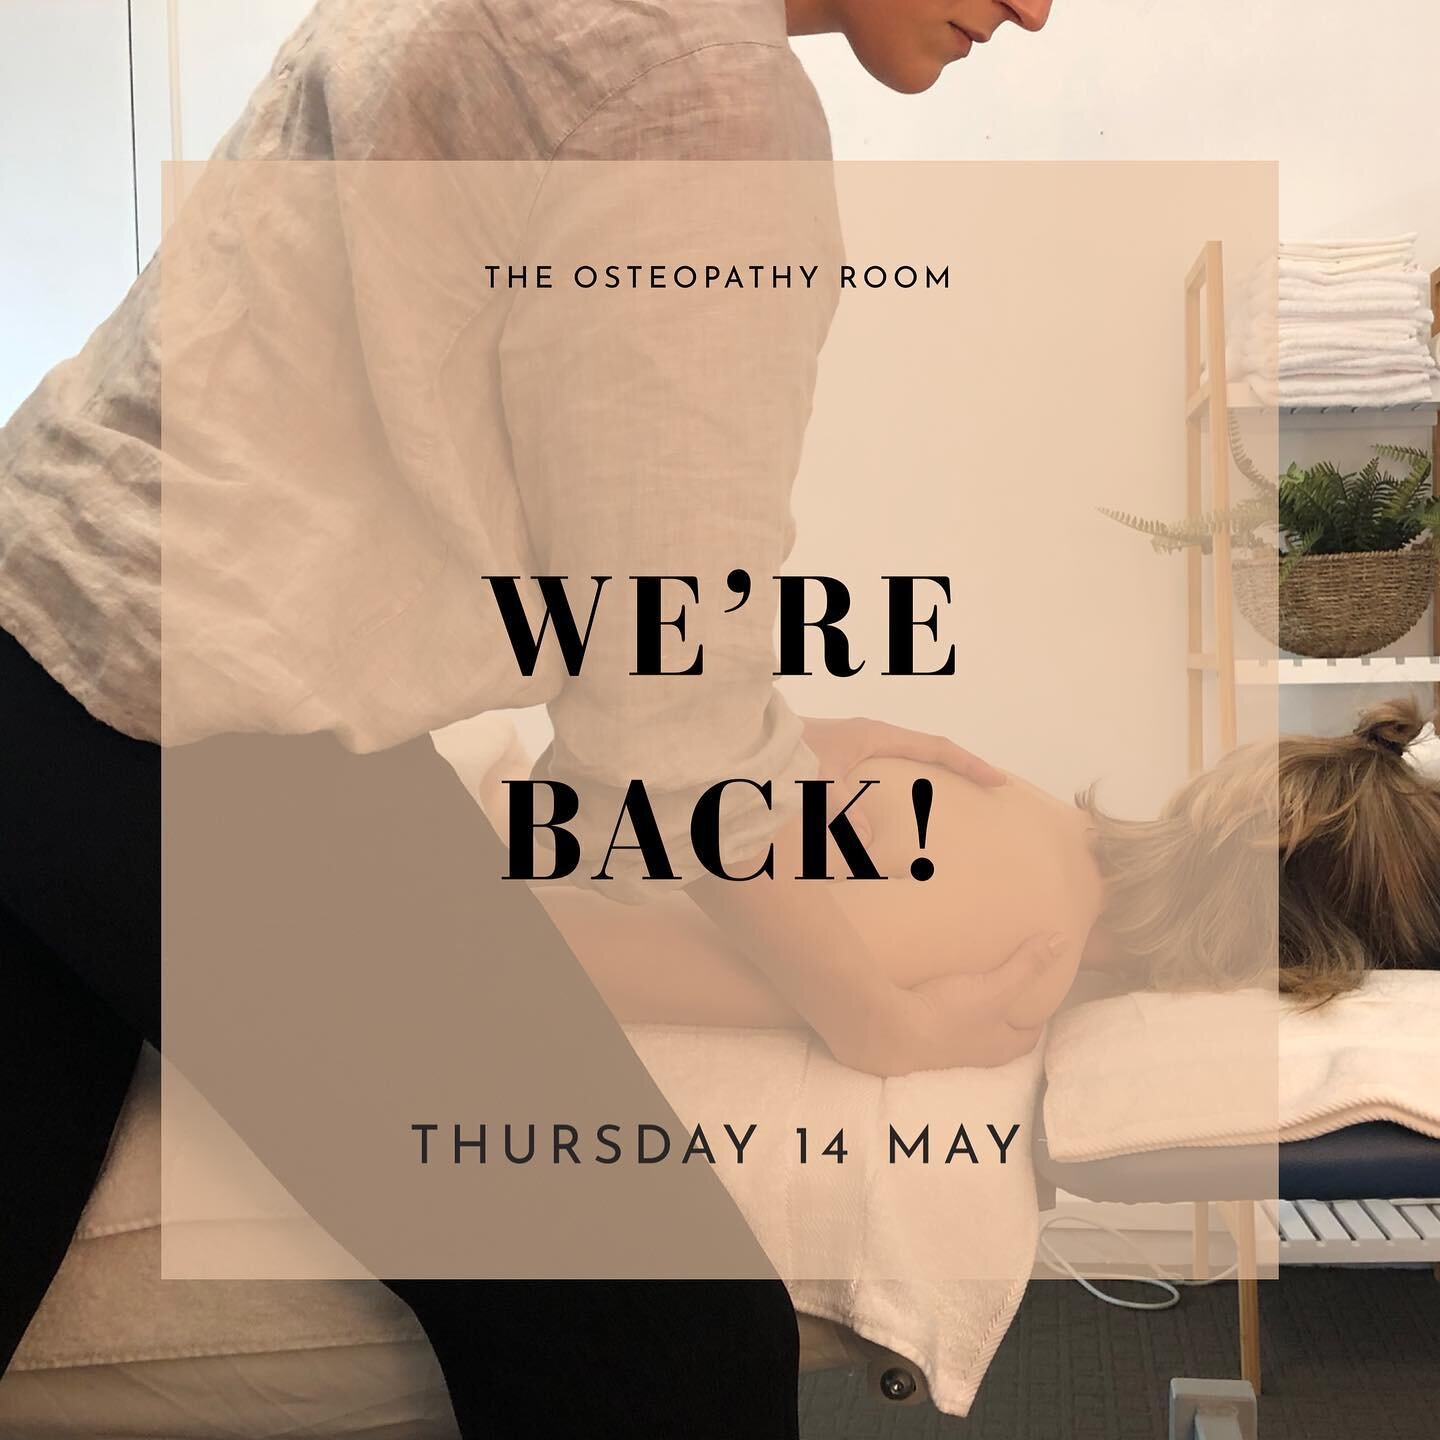 We&rsquo;re back in action as of Thursday 14 May and we can&rsquo;t wait to see you! 
We&rsquo;re currently taking bookings online or over the phone. Please take a look at our online screening questionnaire to ensure it is safe for you to come to the